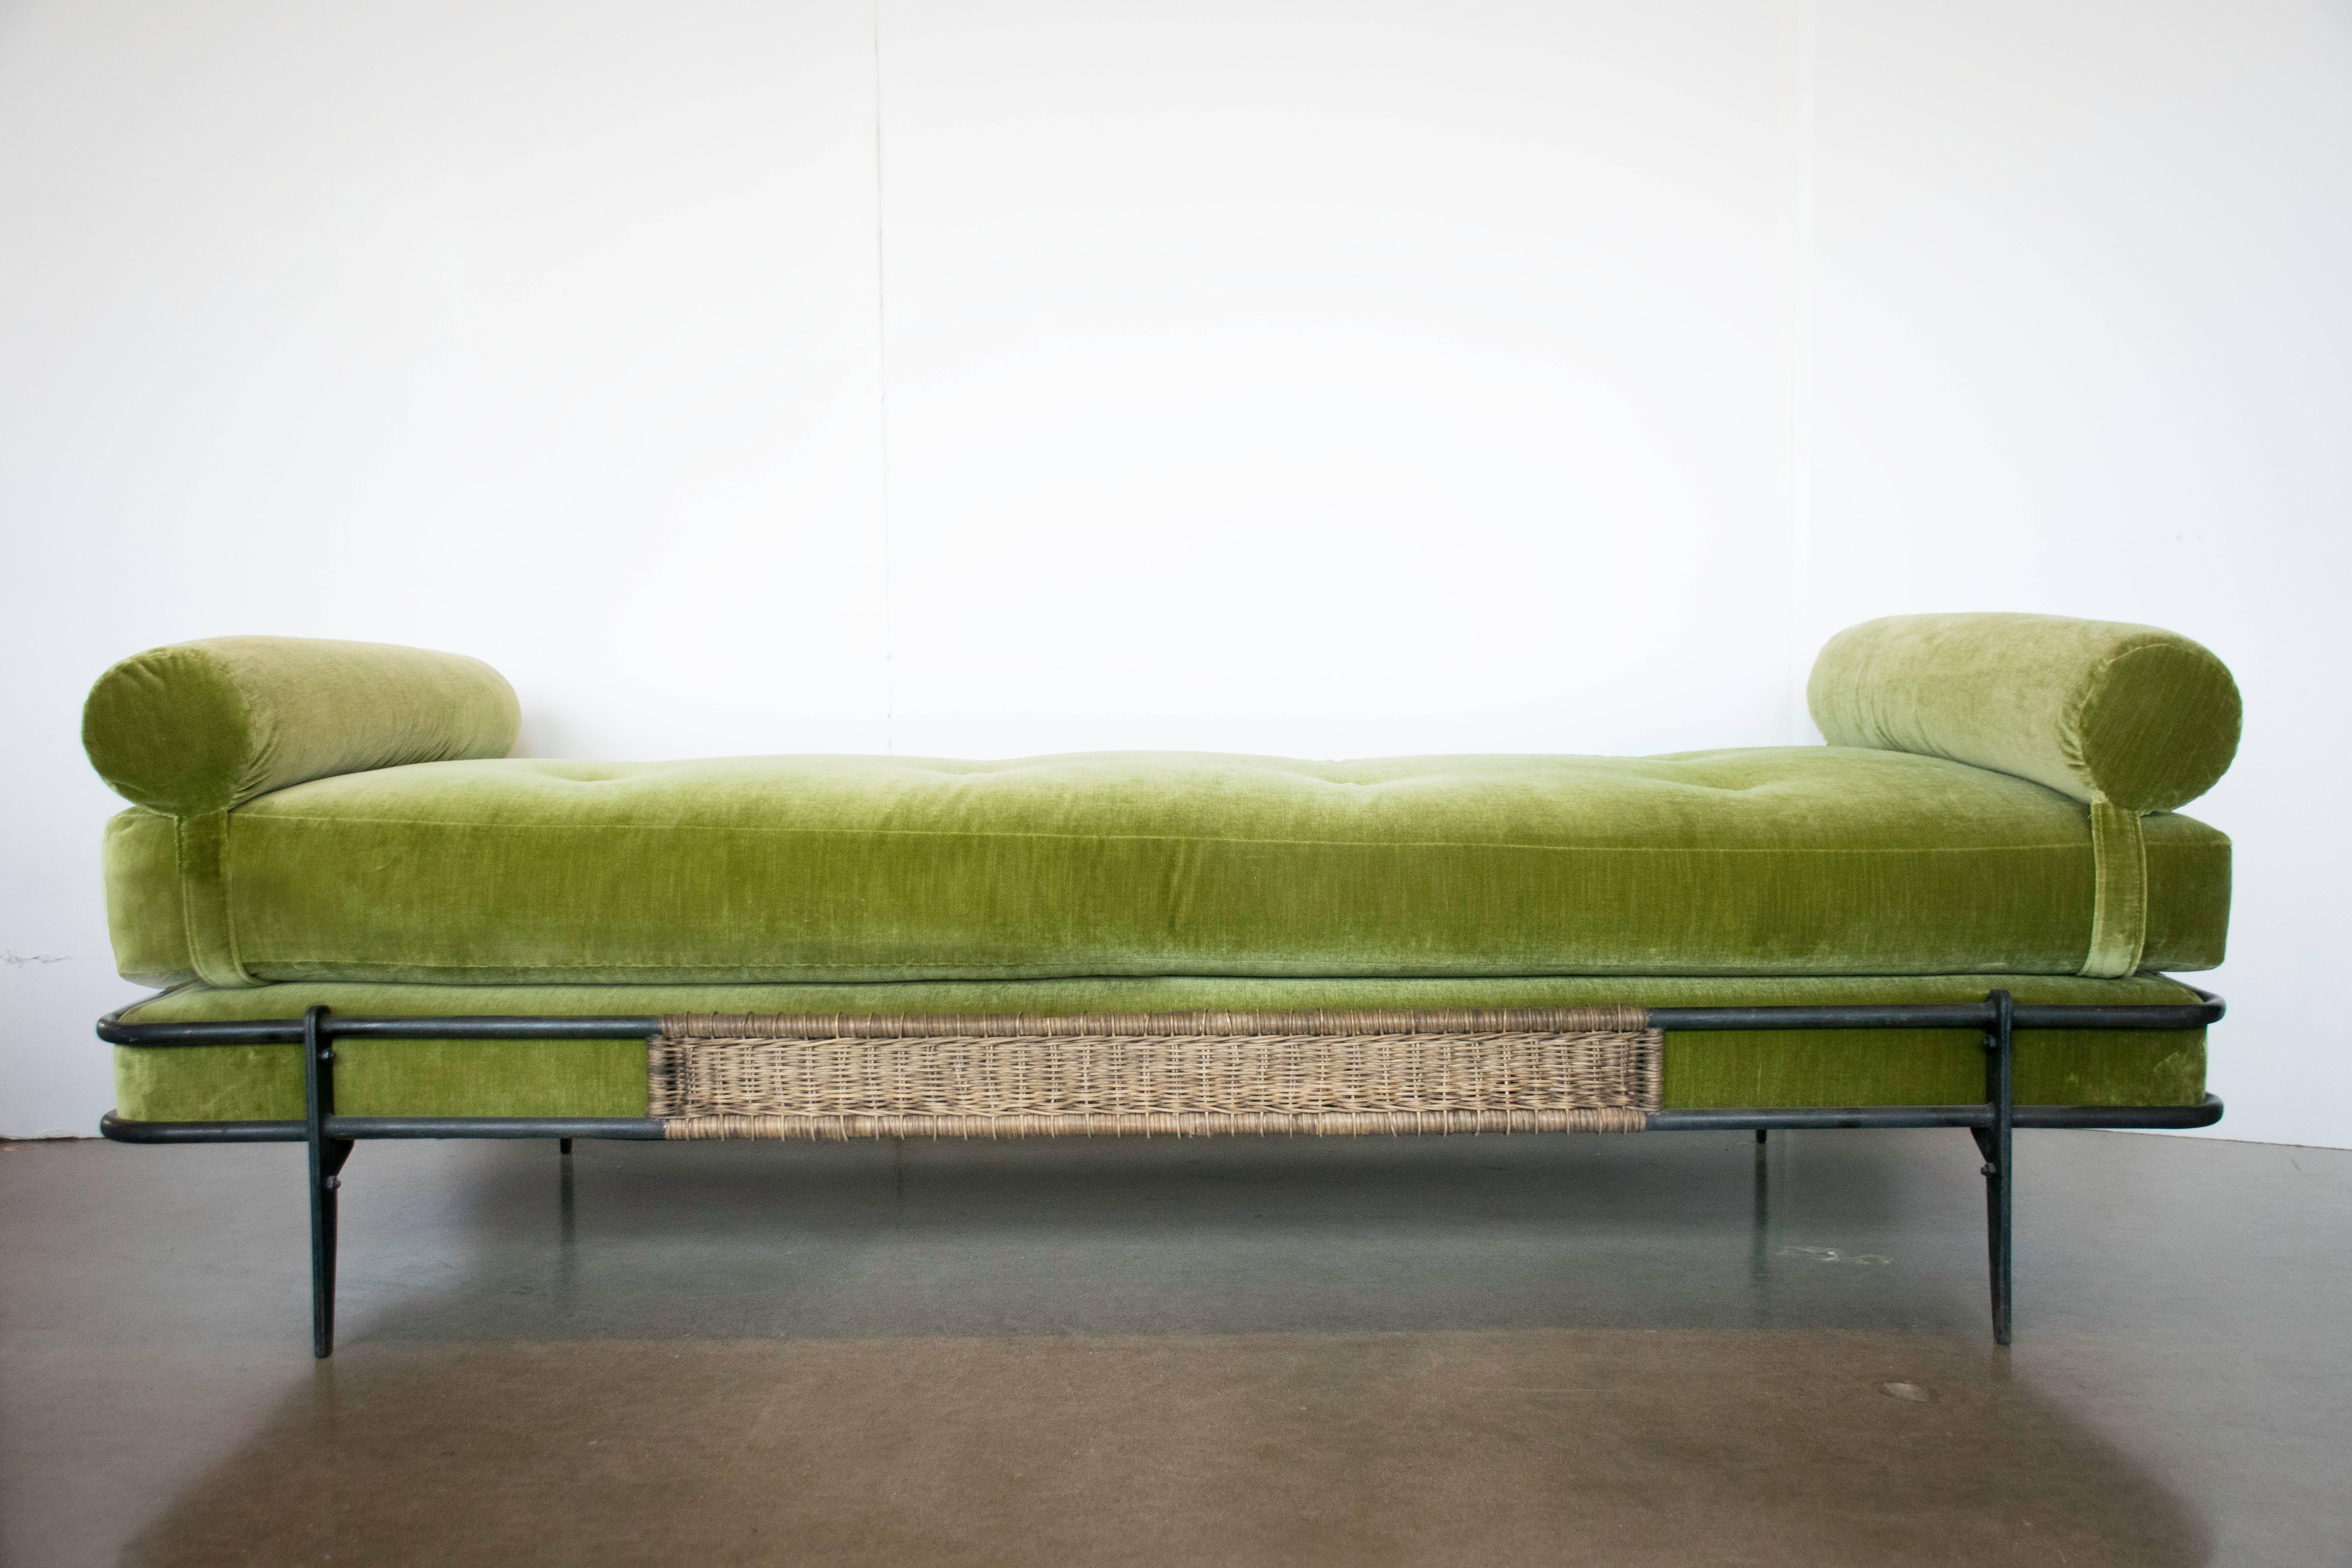 Rare, elegant daybed by renowned Hungarian-French designer, Mathieu Matégot (1910-2001). Enameled steel with woven wicker panels on each side. Custom upholstery in Great Plains Vanity Fair velvet by Holly Hunt.
